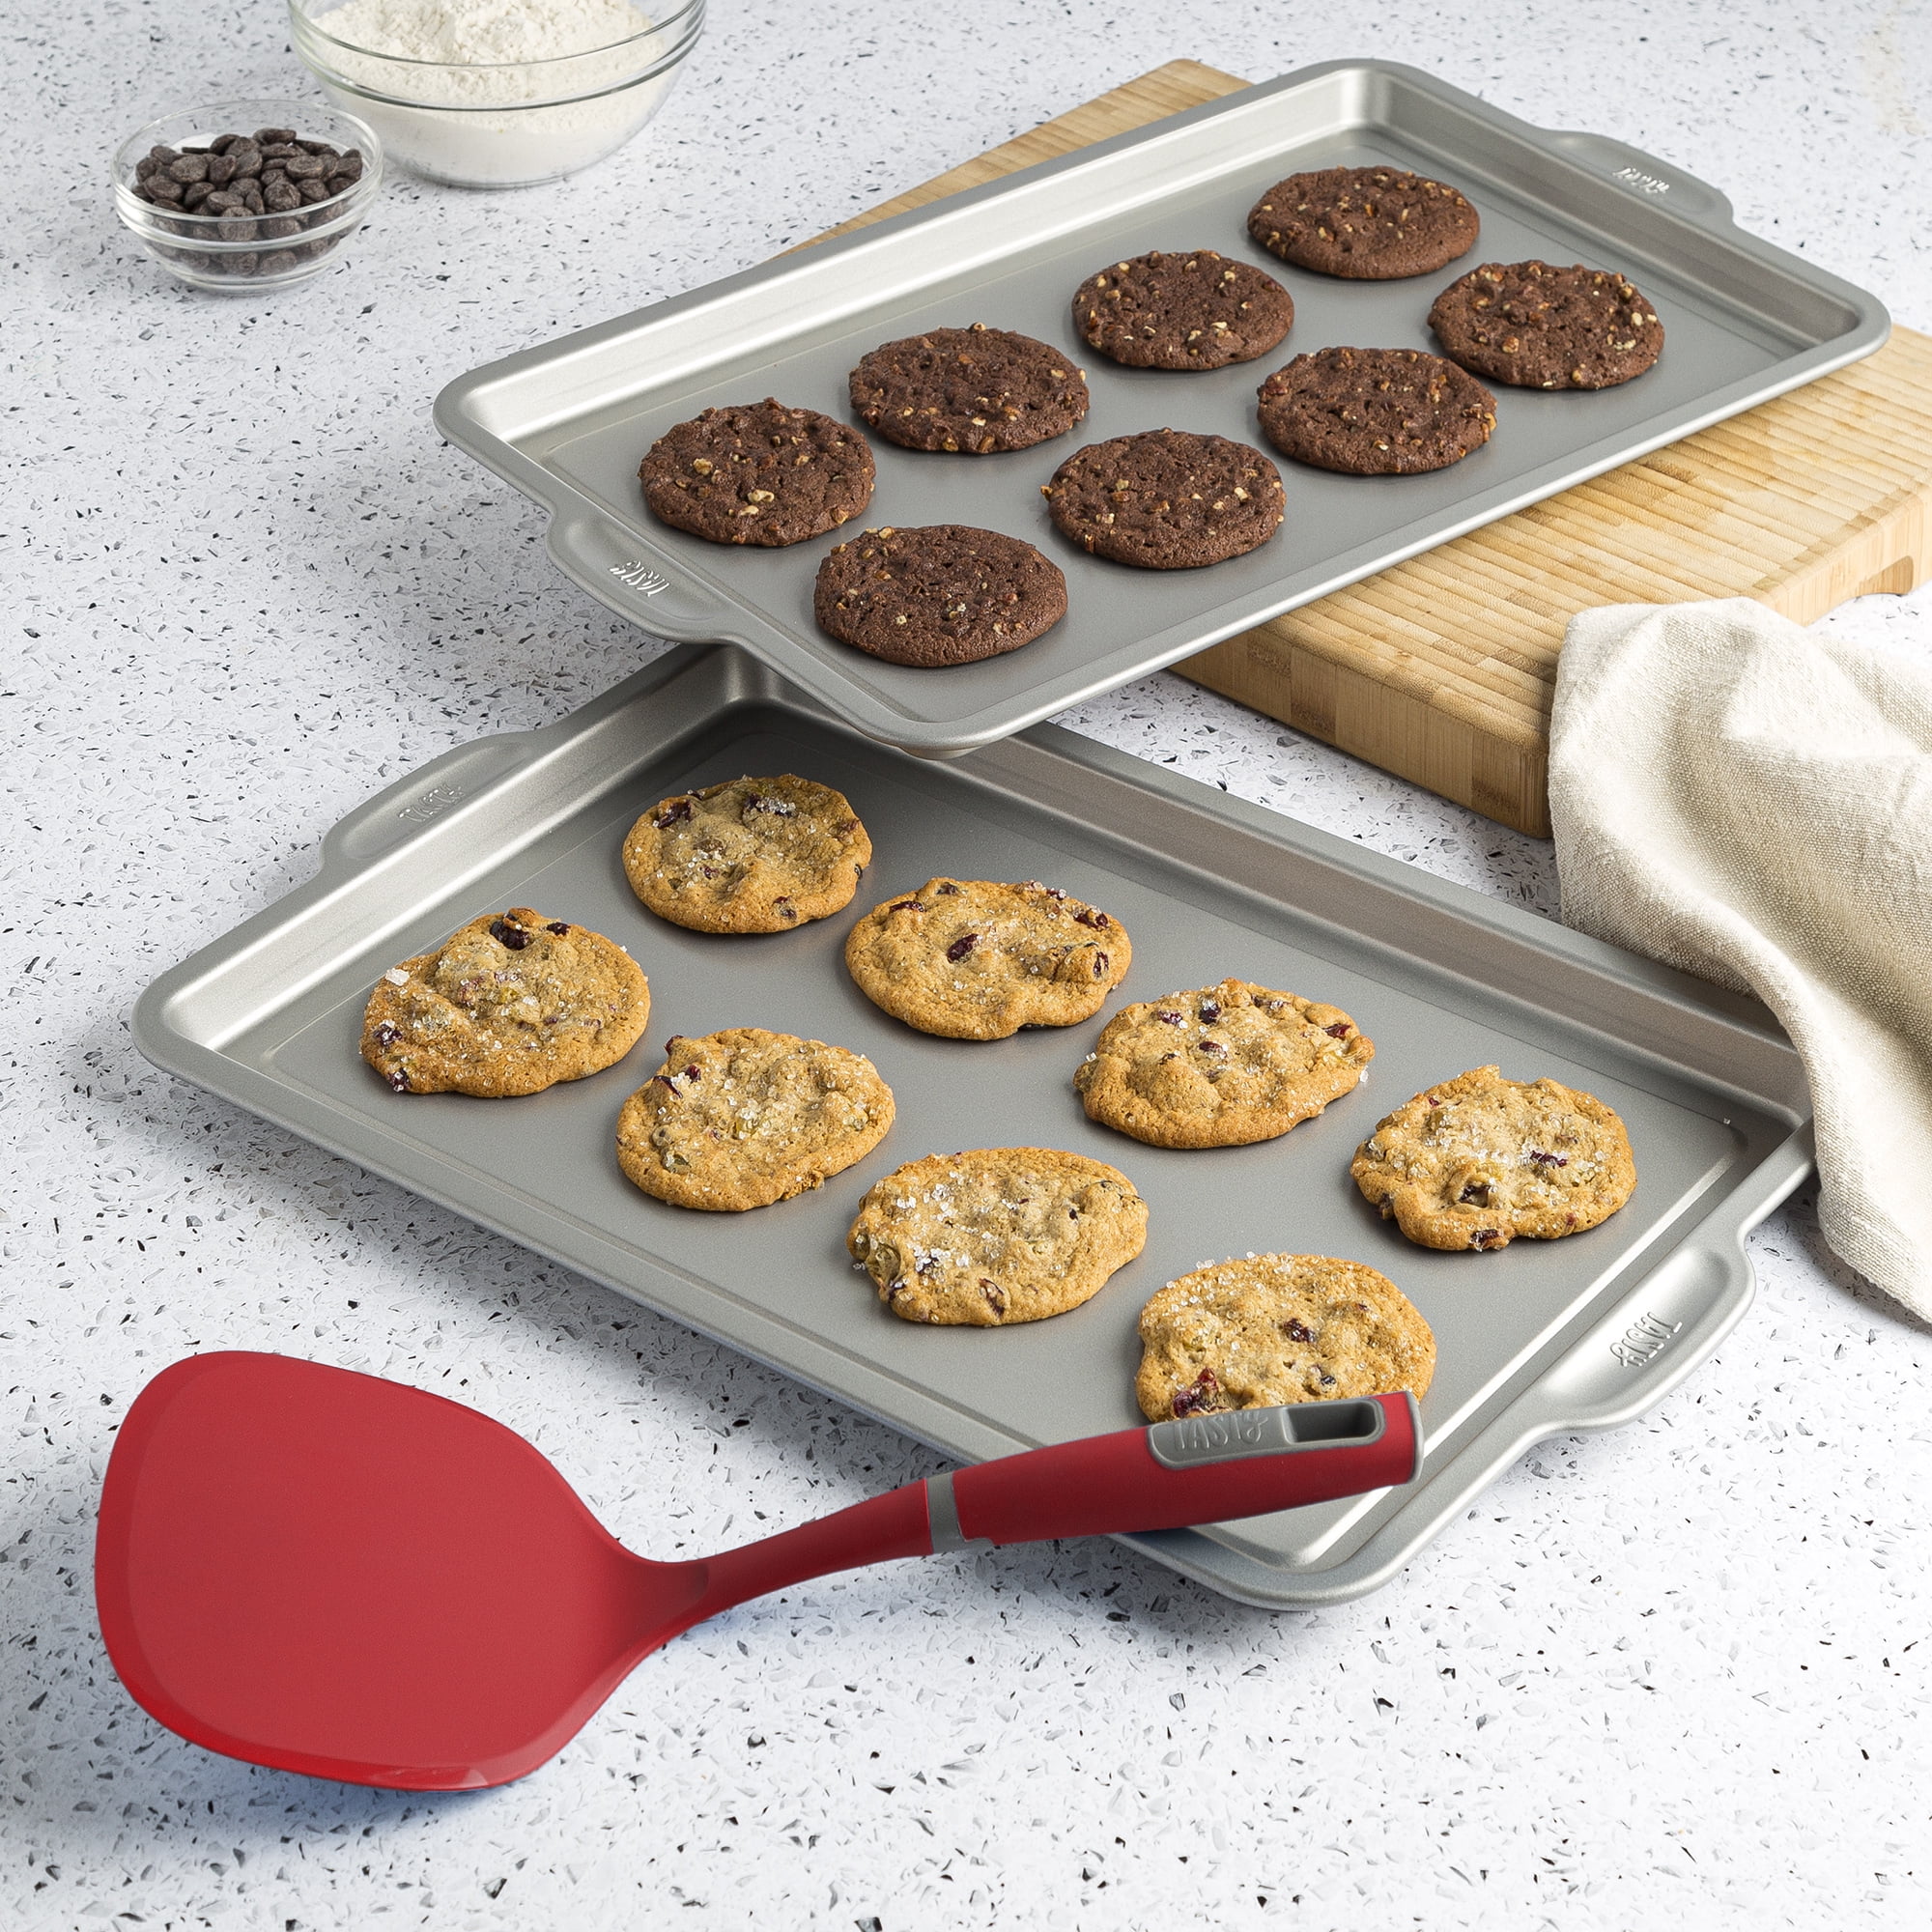 The Best Baking and Cookie Sheet Pans in 2021